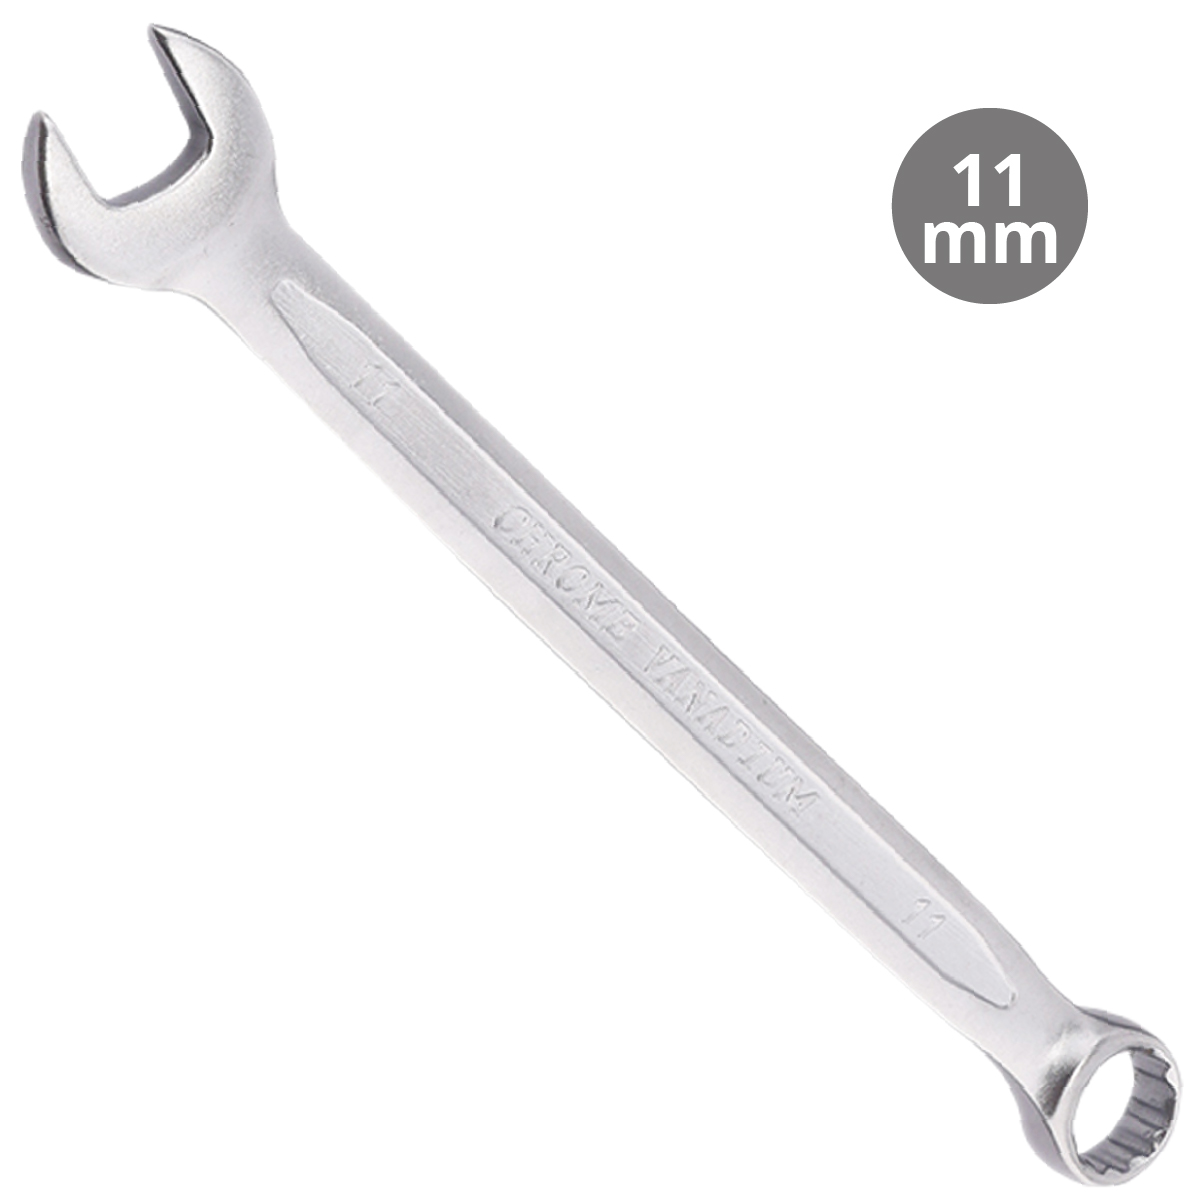 Combination wrench CR-V 11mm